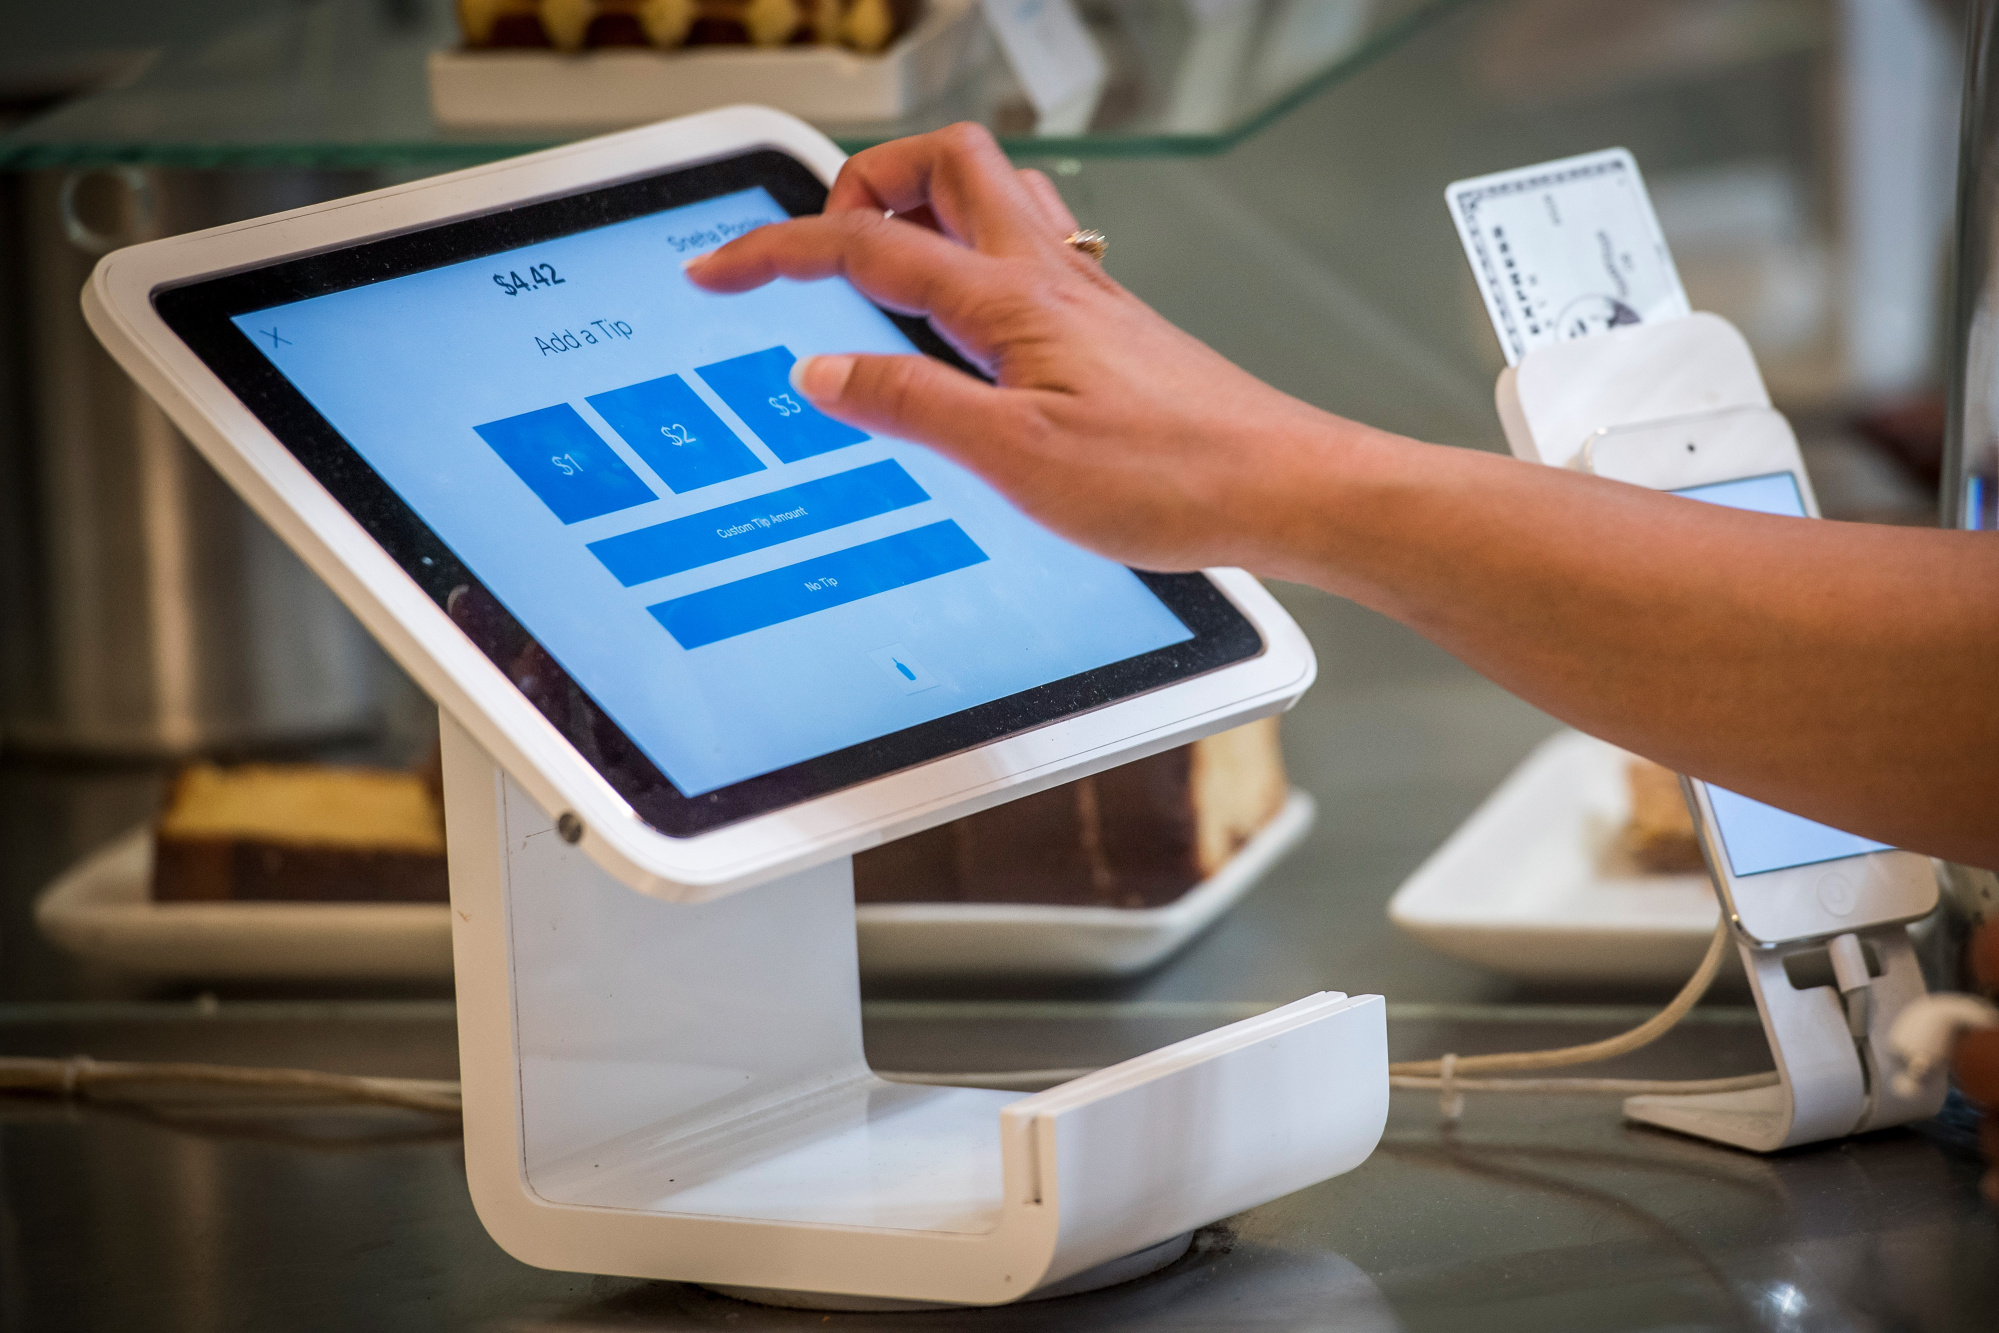 A customer uses a Square&nbsp;device to make a payment.